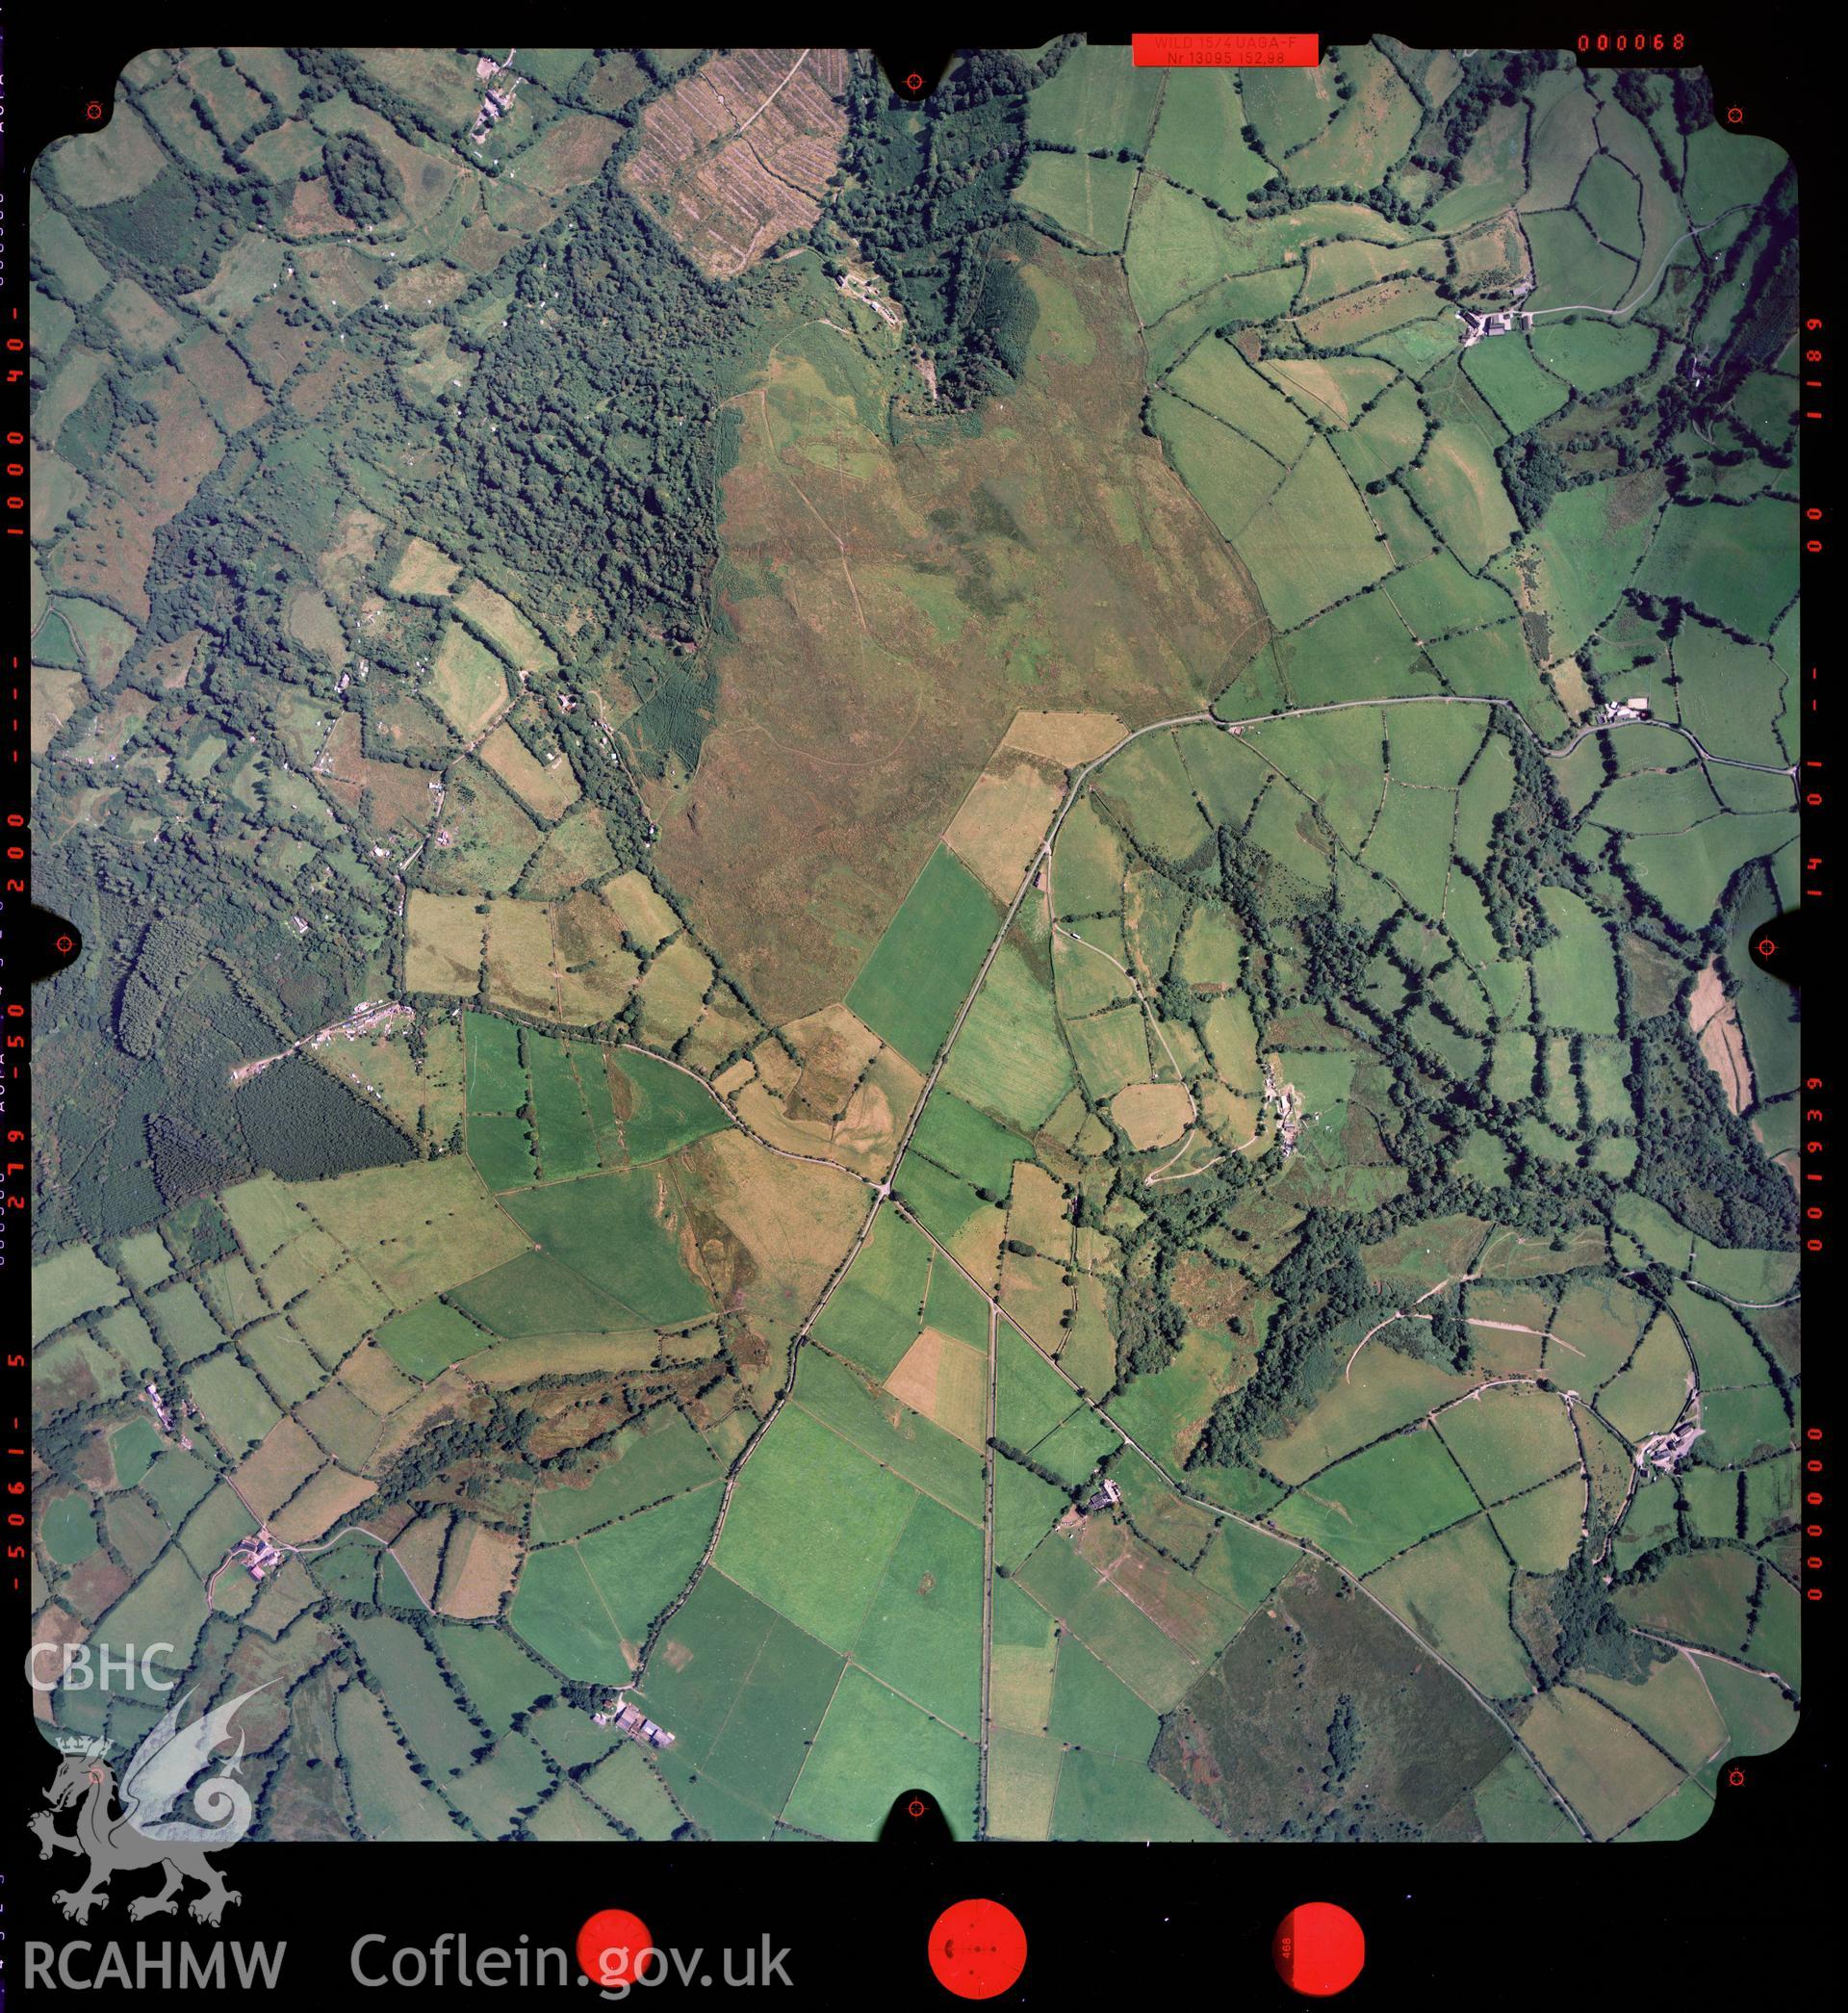 Digitized copy of a colour aerial photograph showing the area to the west of Talley, taken by Ordnance Survey, 2003.